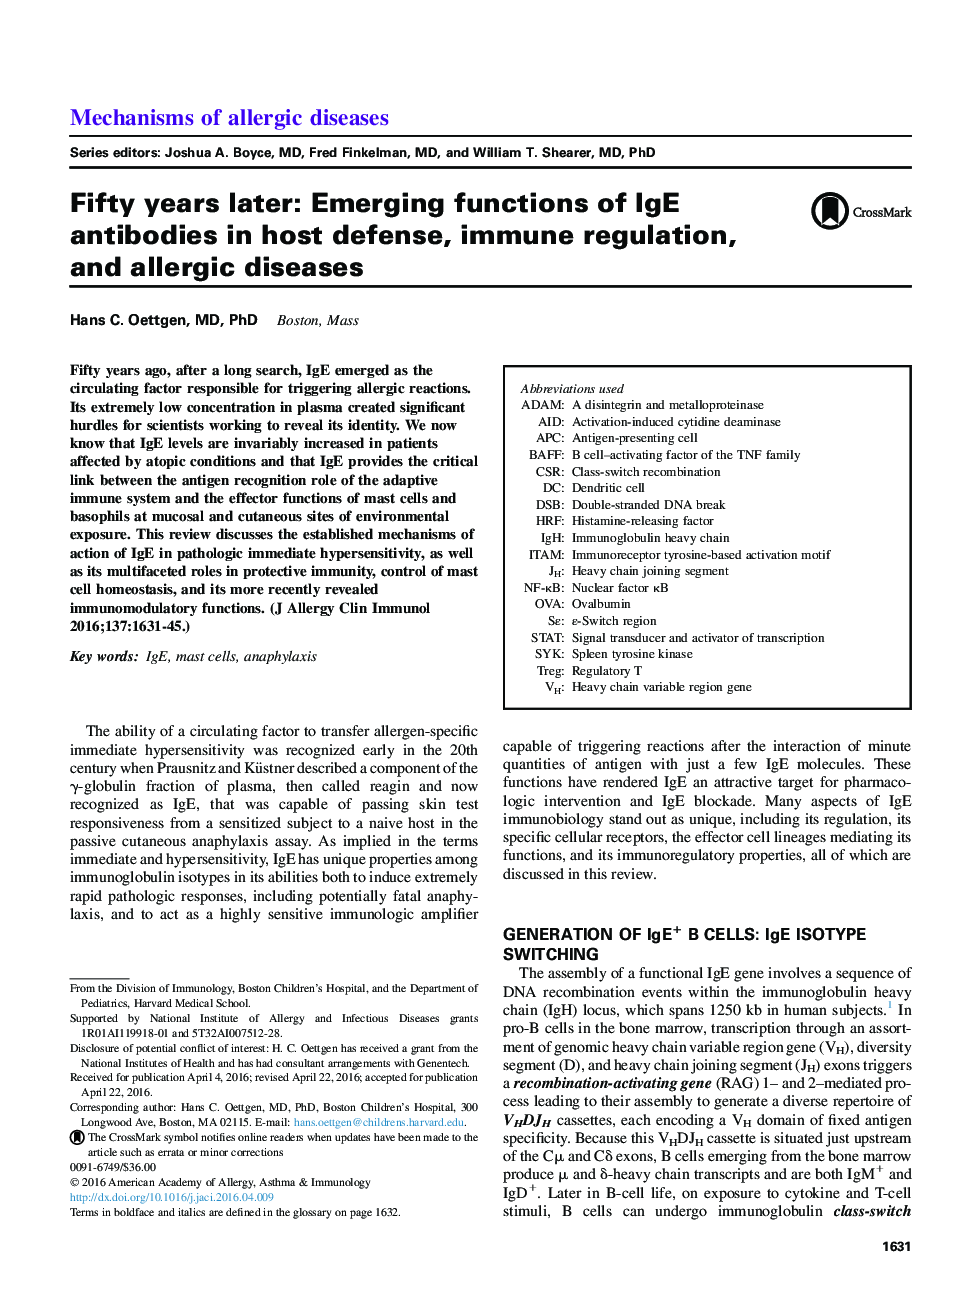 Fifty years later: Emerging functions of IgE antibodies in host defense, immune regulation, and allergic diseases